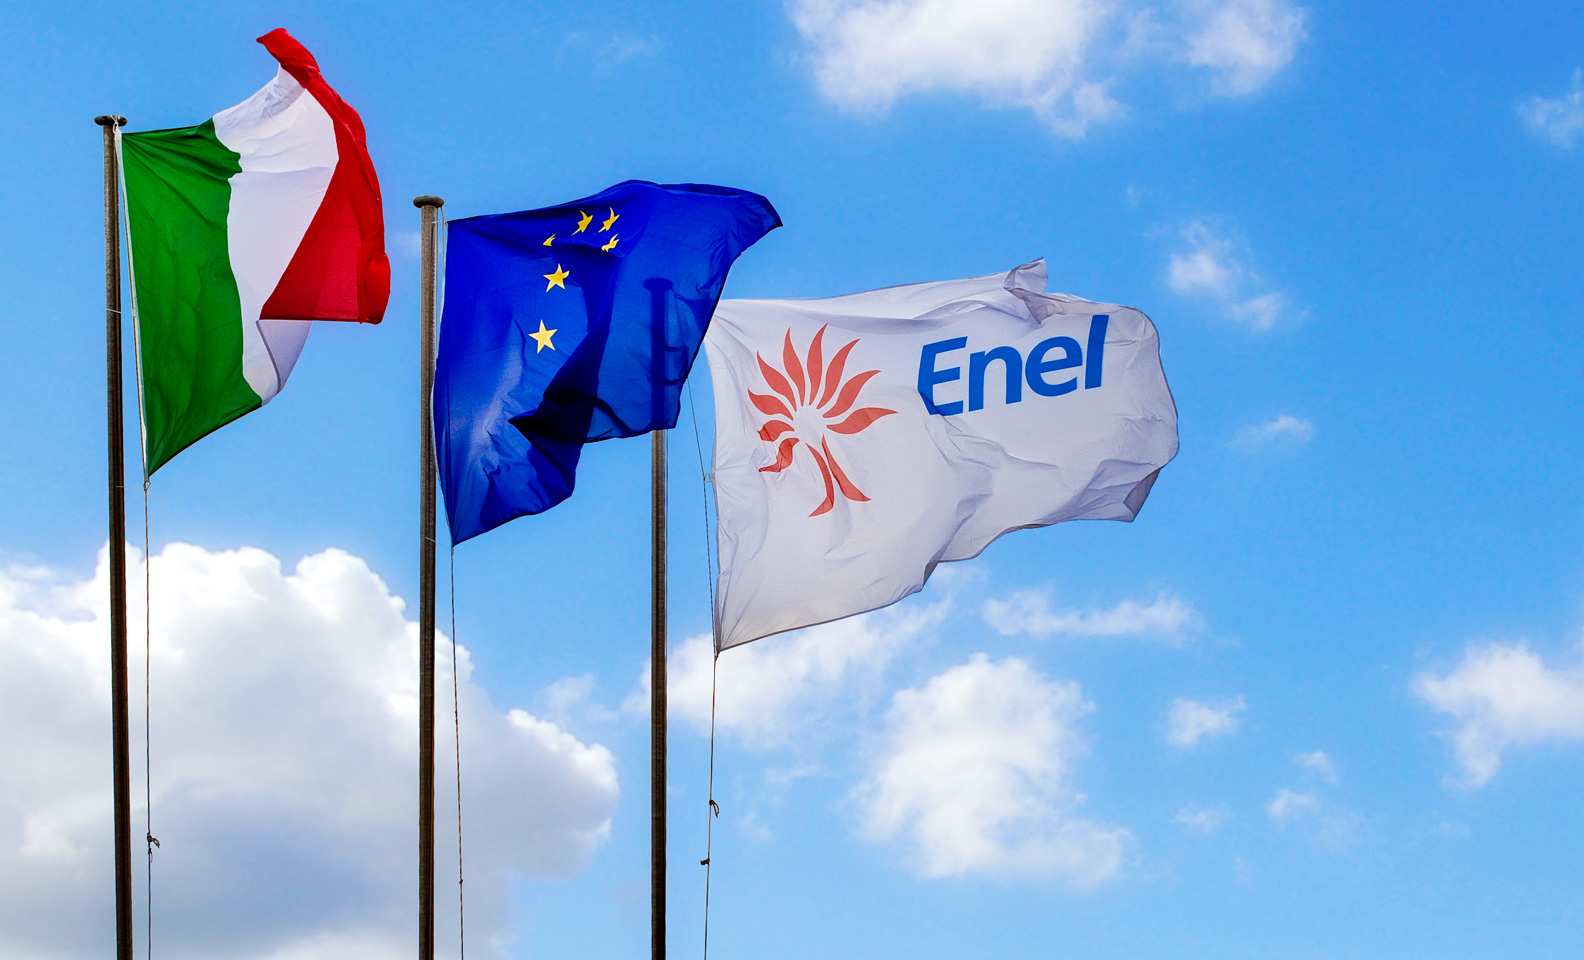 Enel is investing for clean, safe and efficient energy, the goals